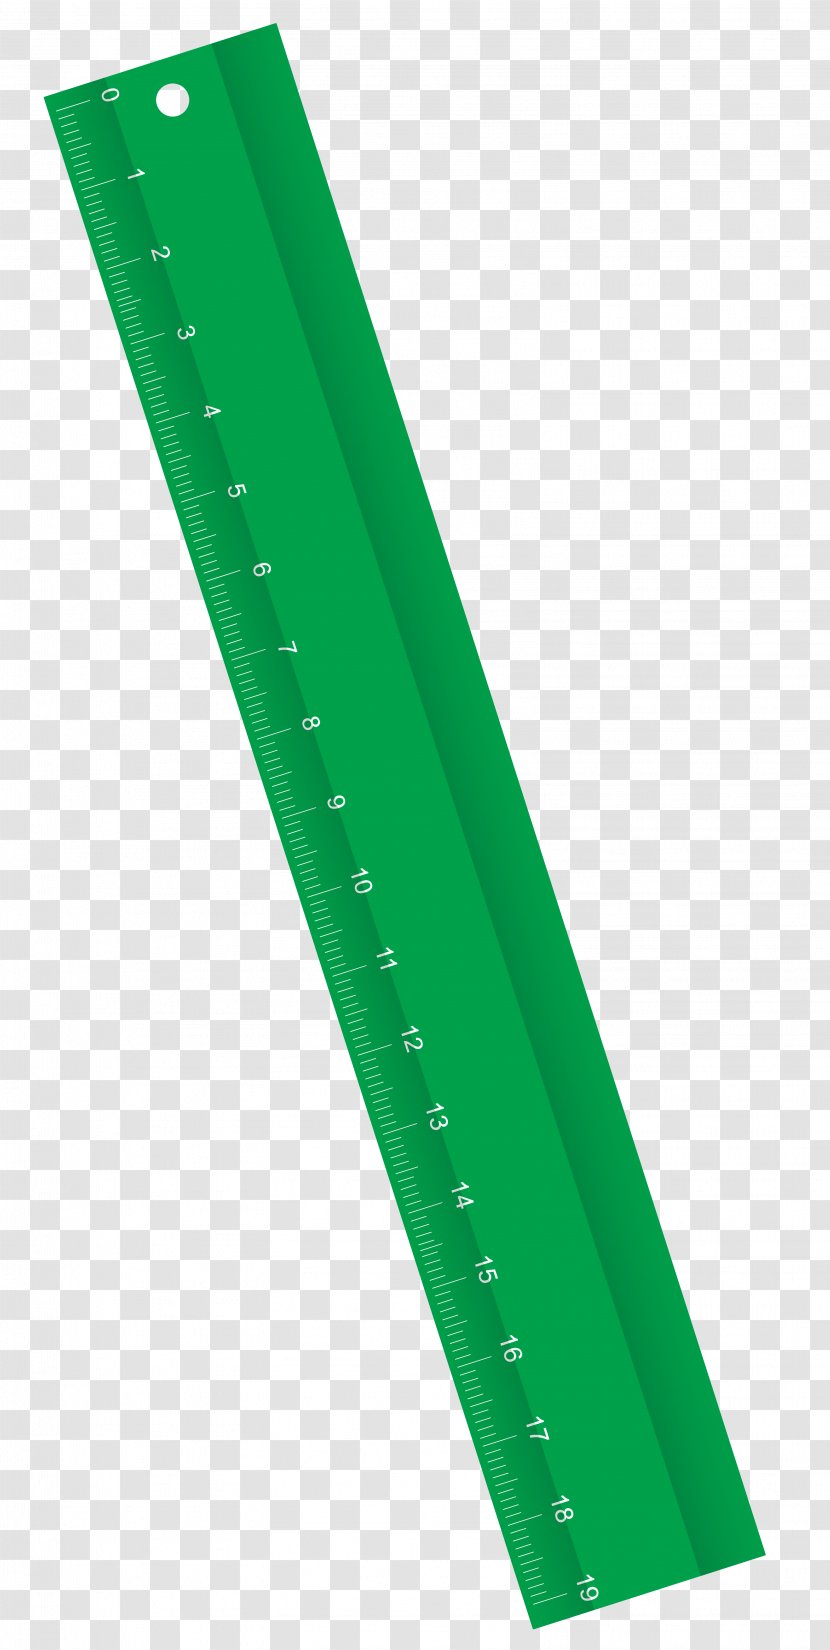 Green Angle Font - Rectangle - Ruler Clipart Image Transparent PNG